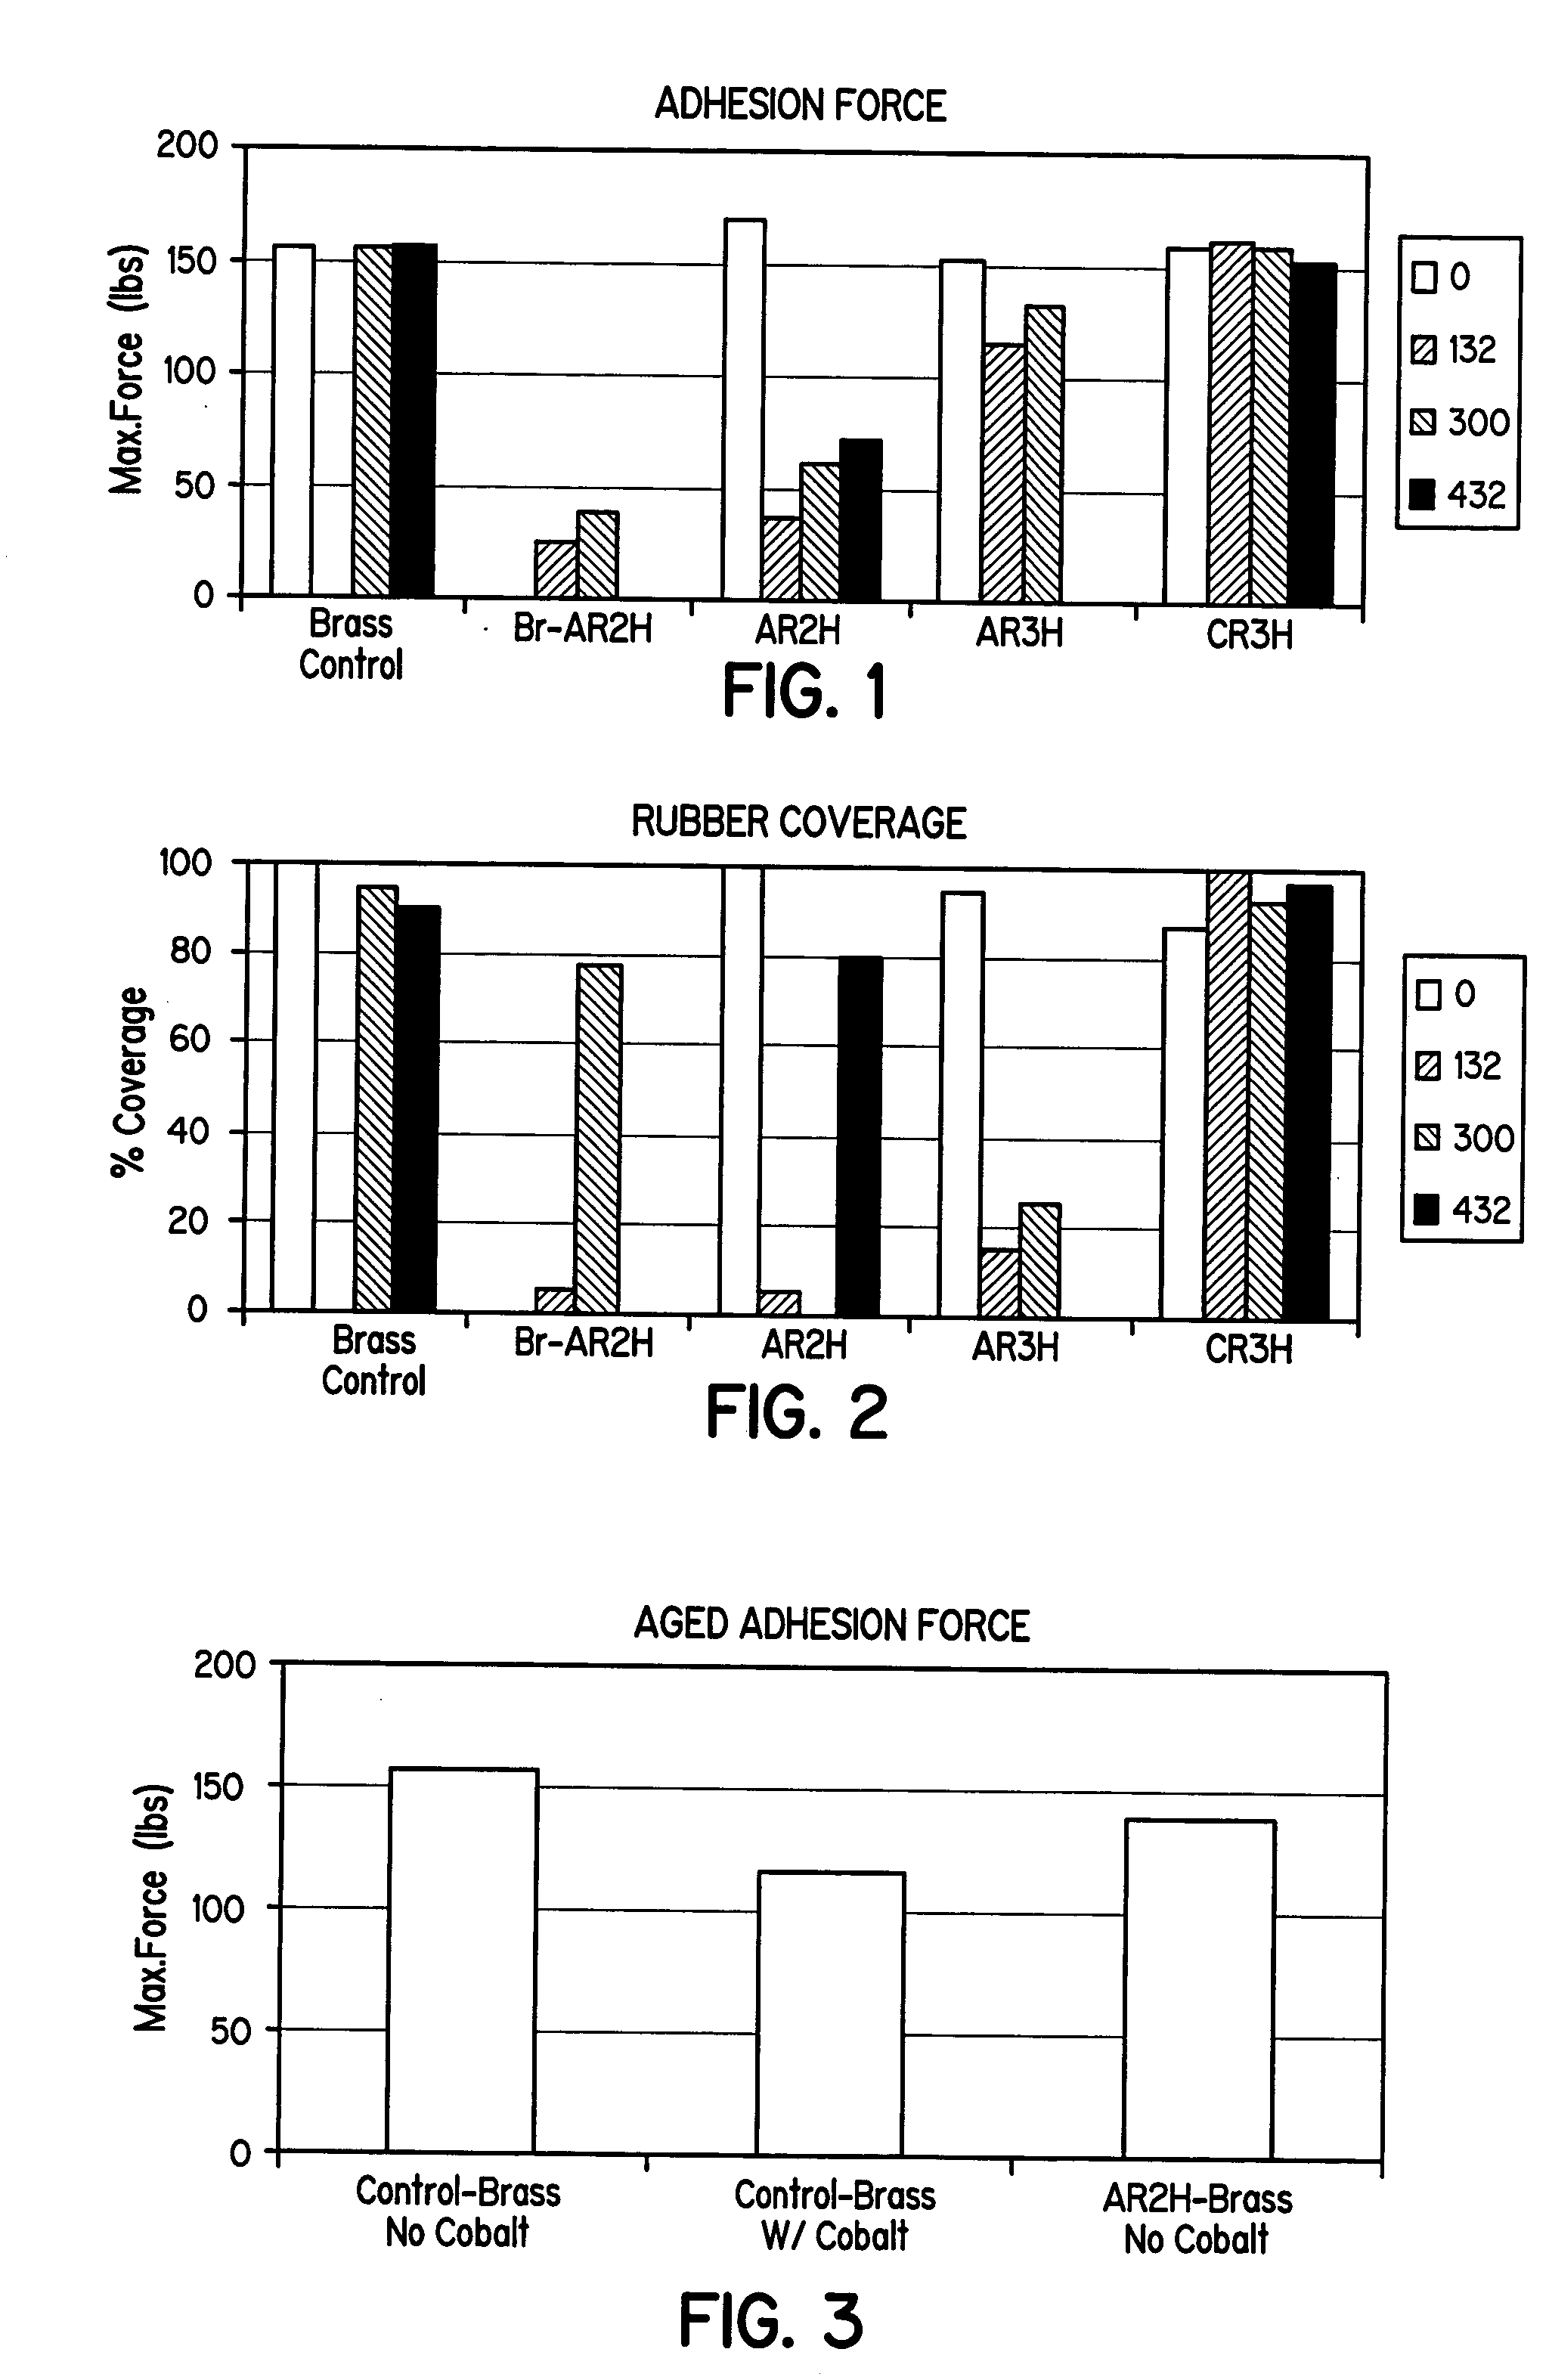 Silane compositions and methods for bonding rubber to metals